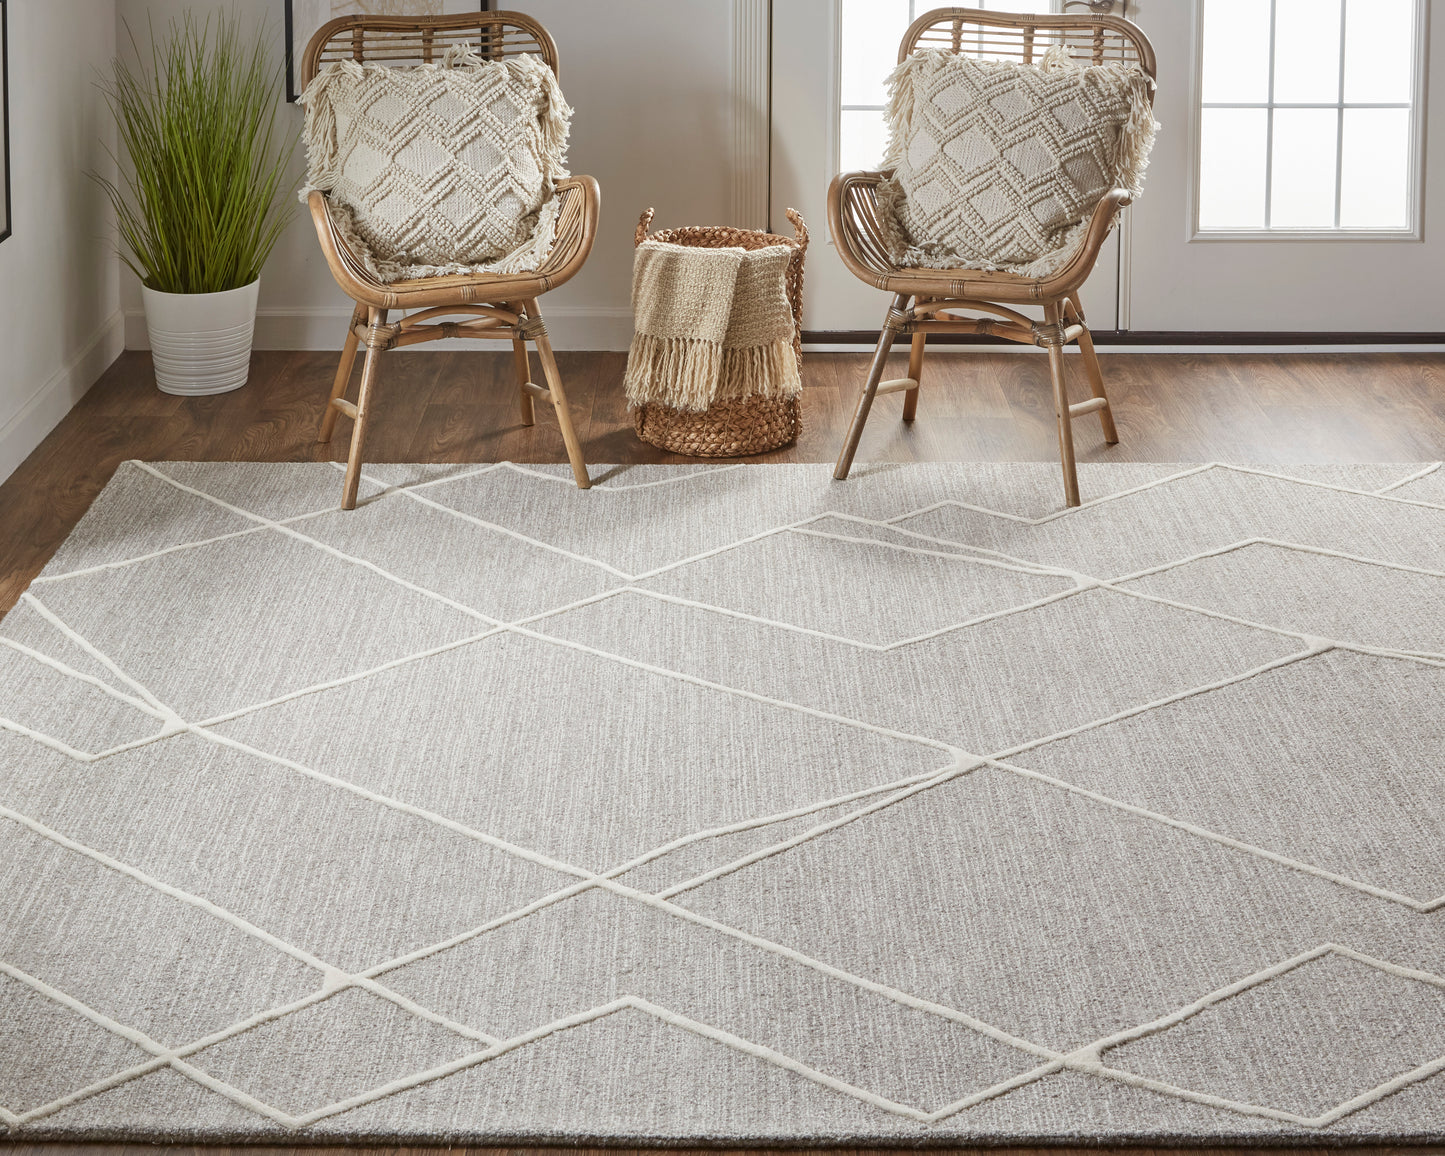 Euclid T8004 Hand Tufted Wool Indoor Area Rug by Feizy Rugs